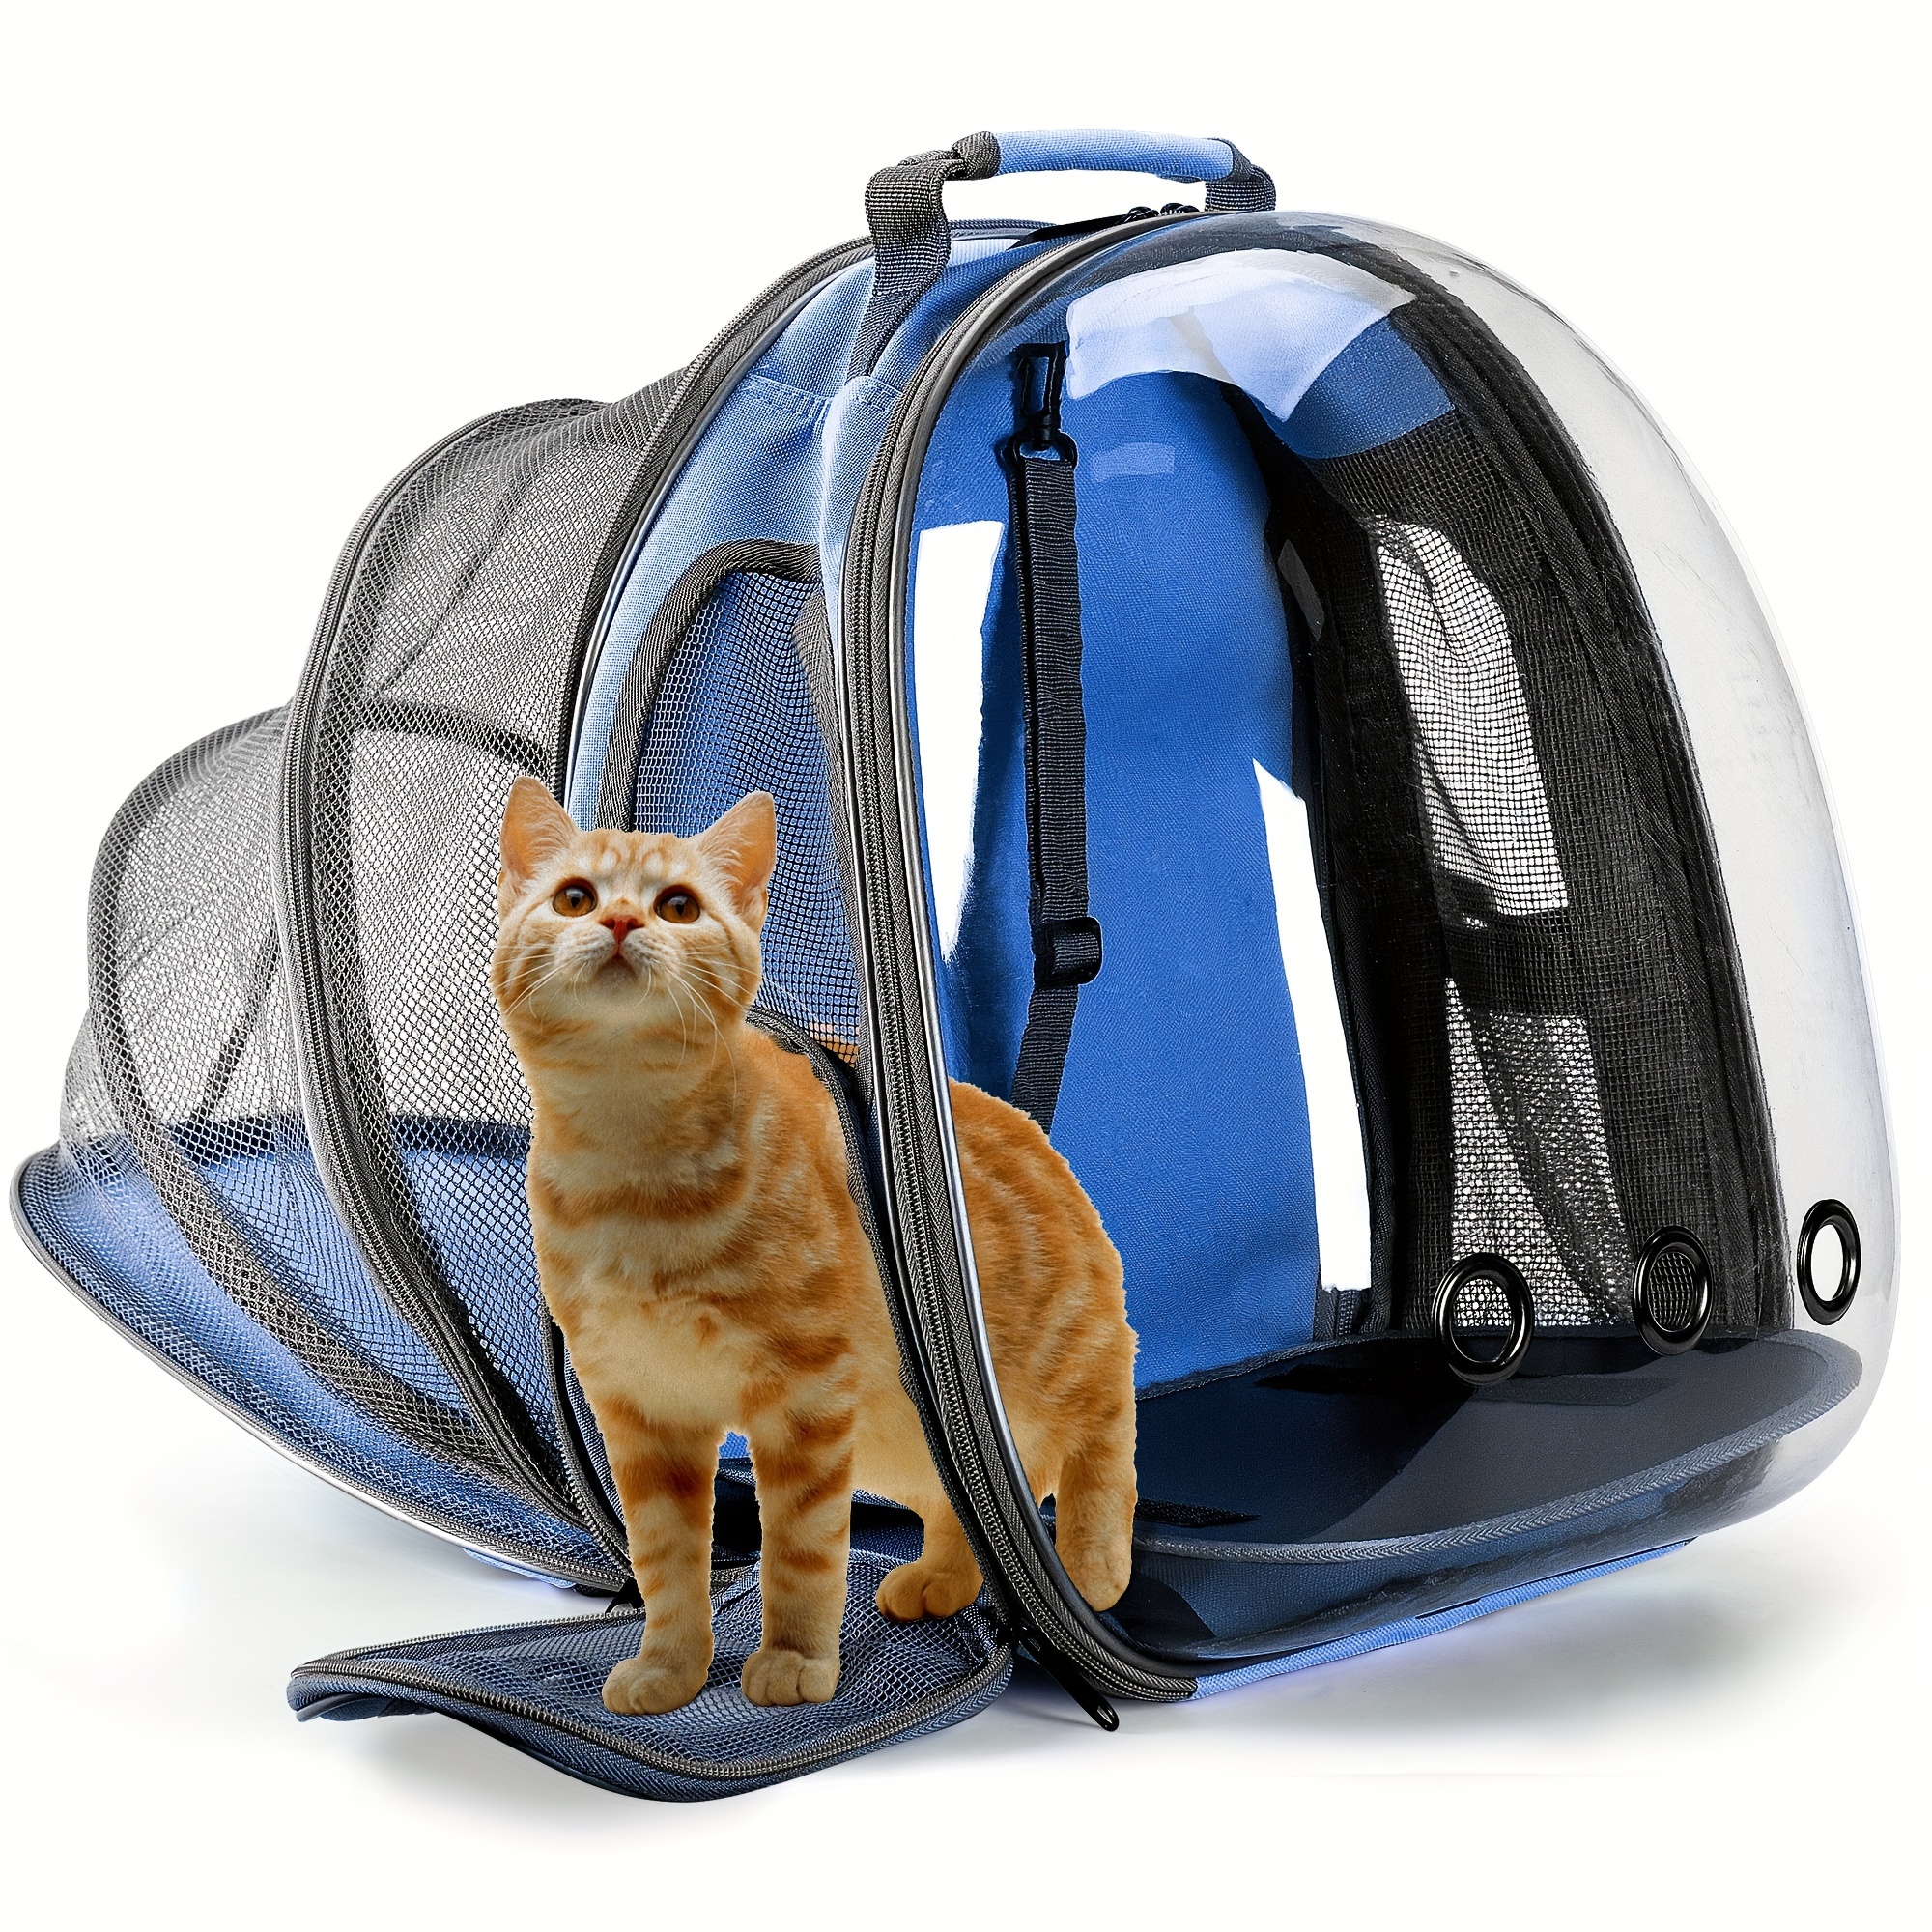 

Cat Backpack Carrier, Breathable Cat Carrier Large Space Bubble Pet Backpack For Kitty Small Dog Up To 15lbs, Transparent & Foldable Pet Carrier For Travel Hiking